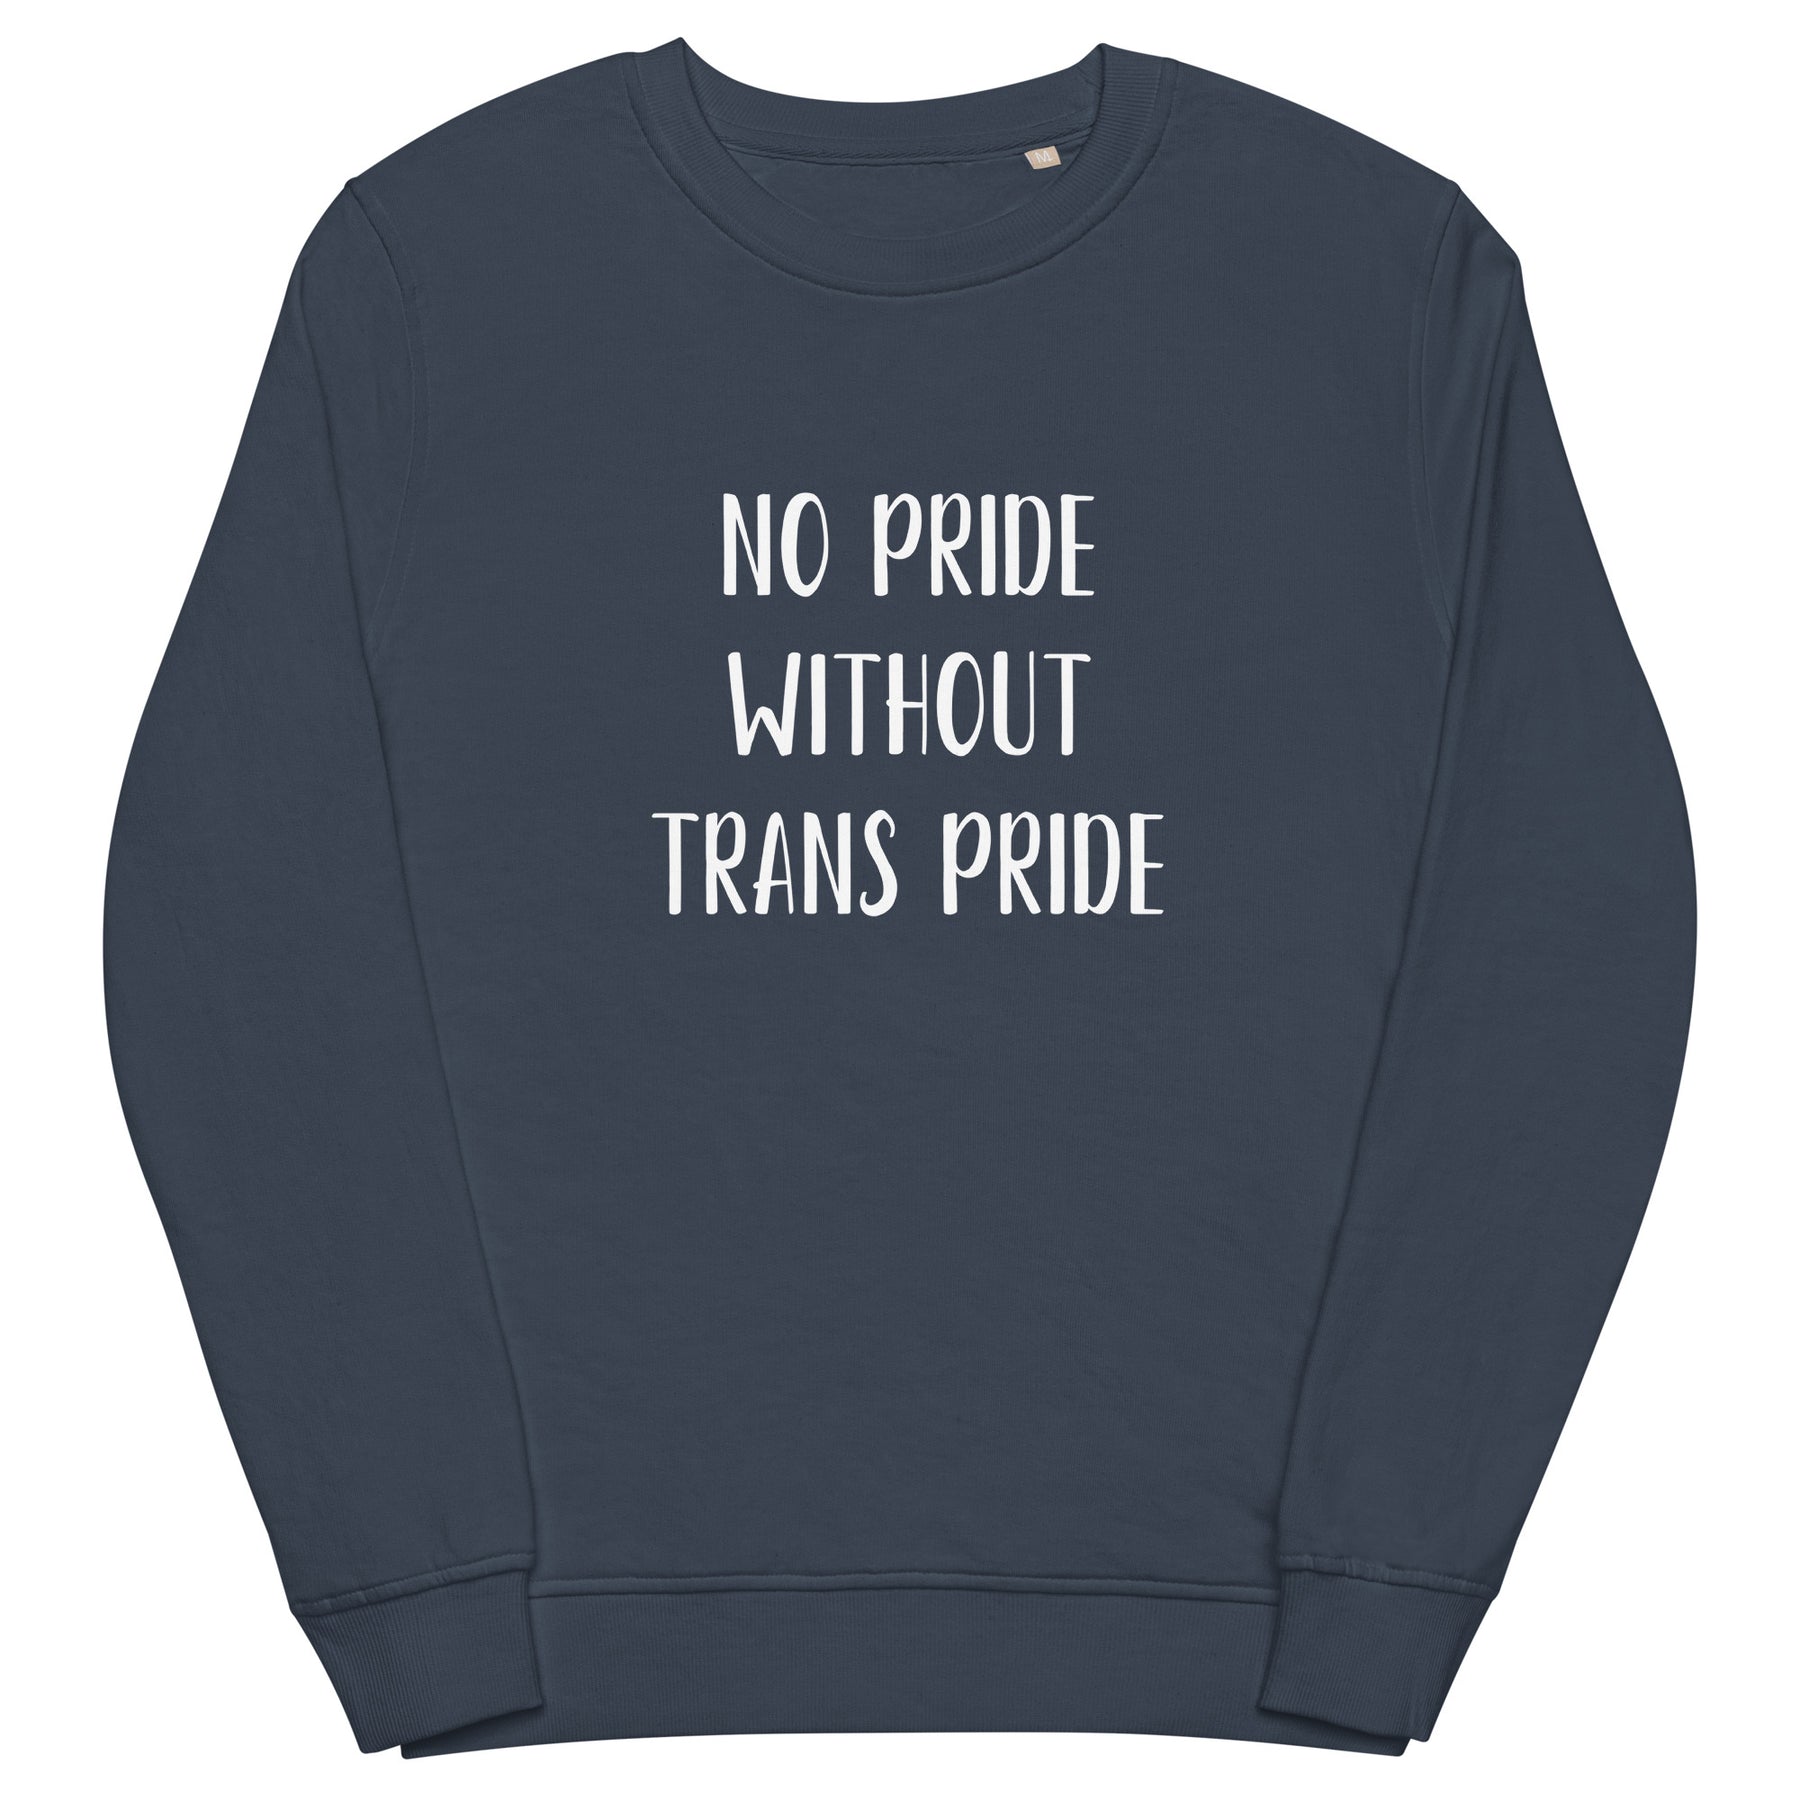 What is a comfort hoodie in transgender terms? I heard it being